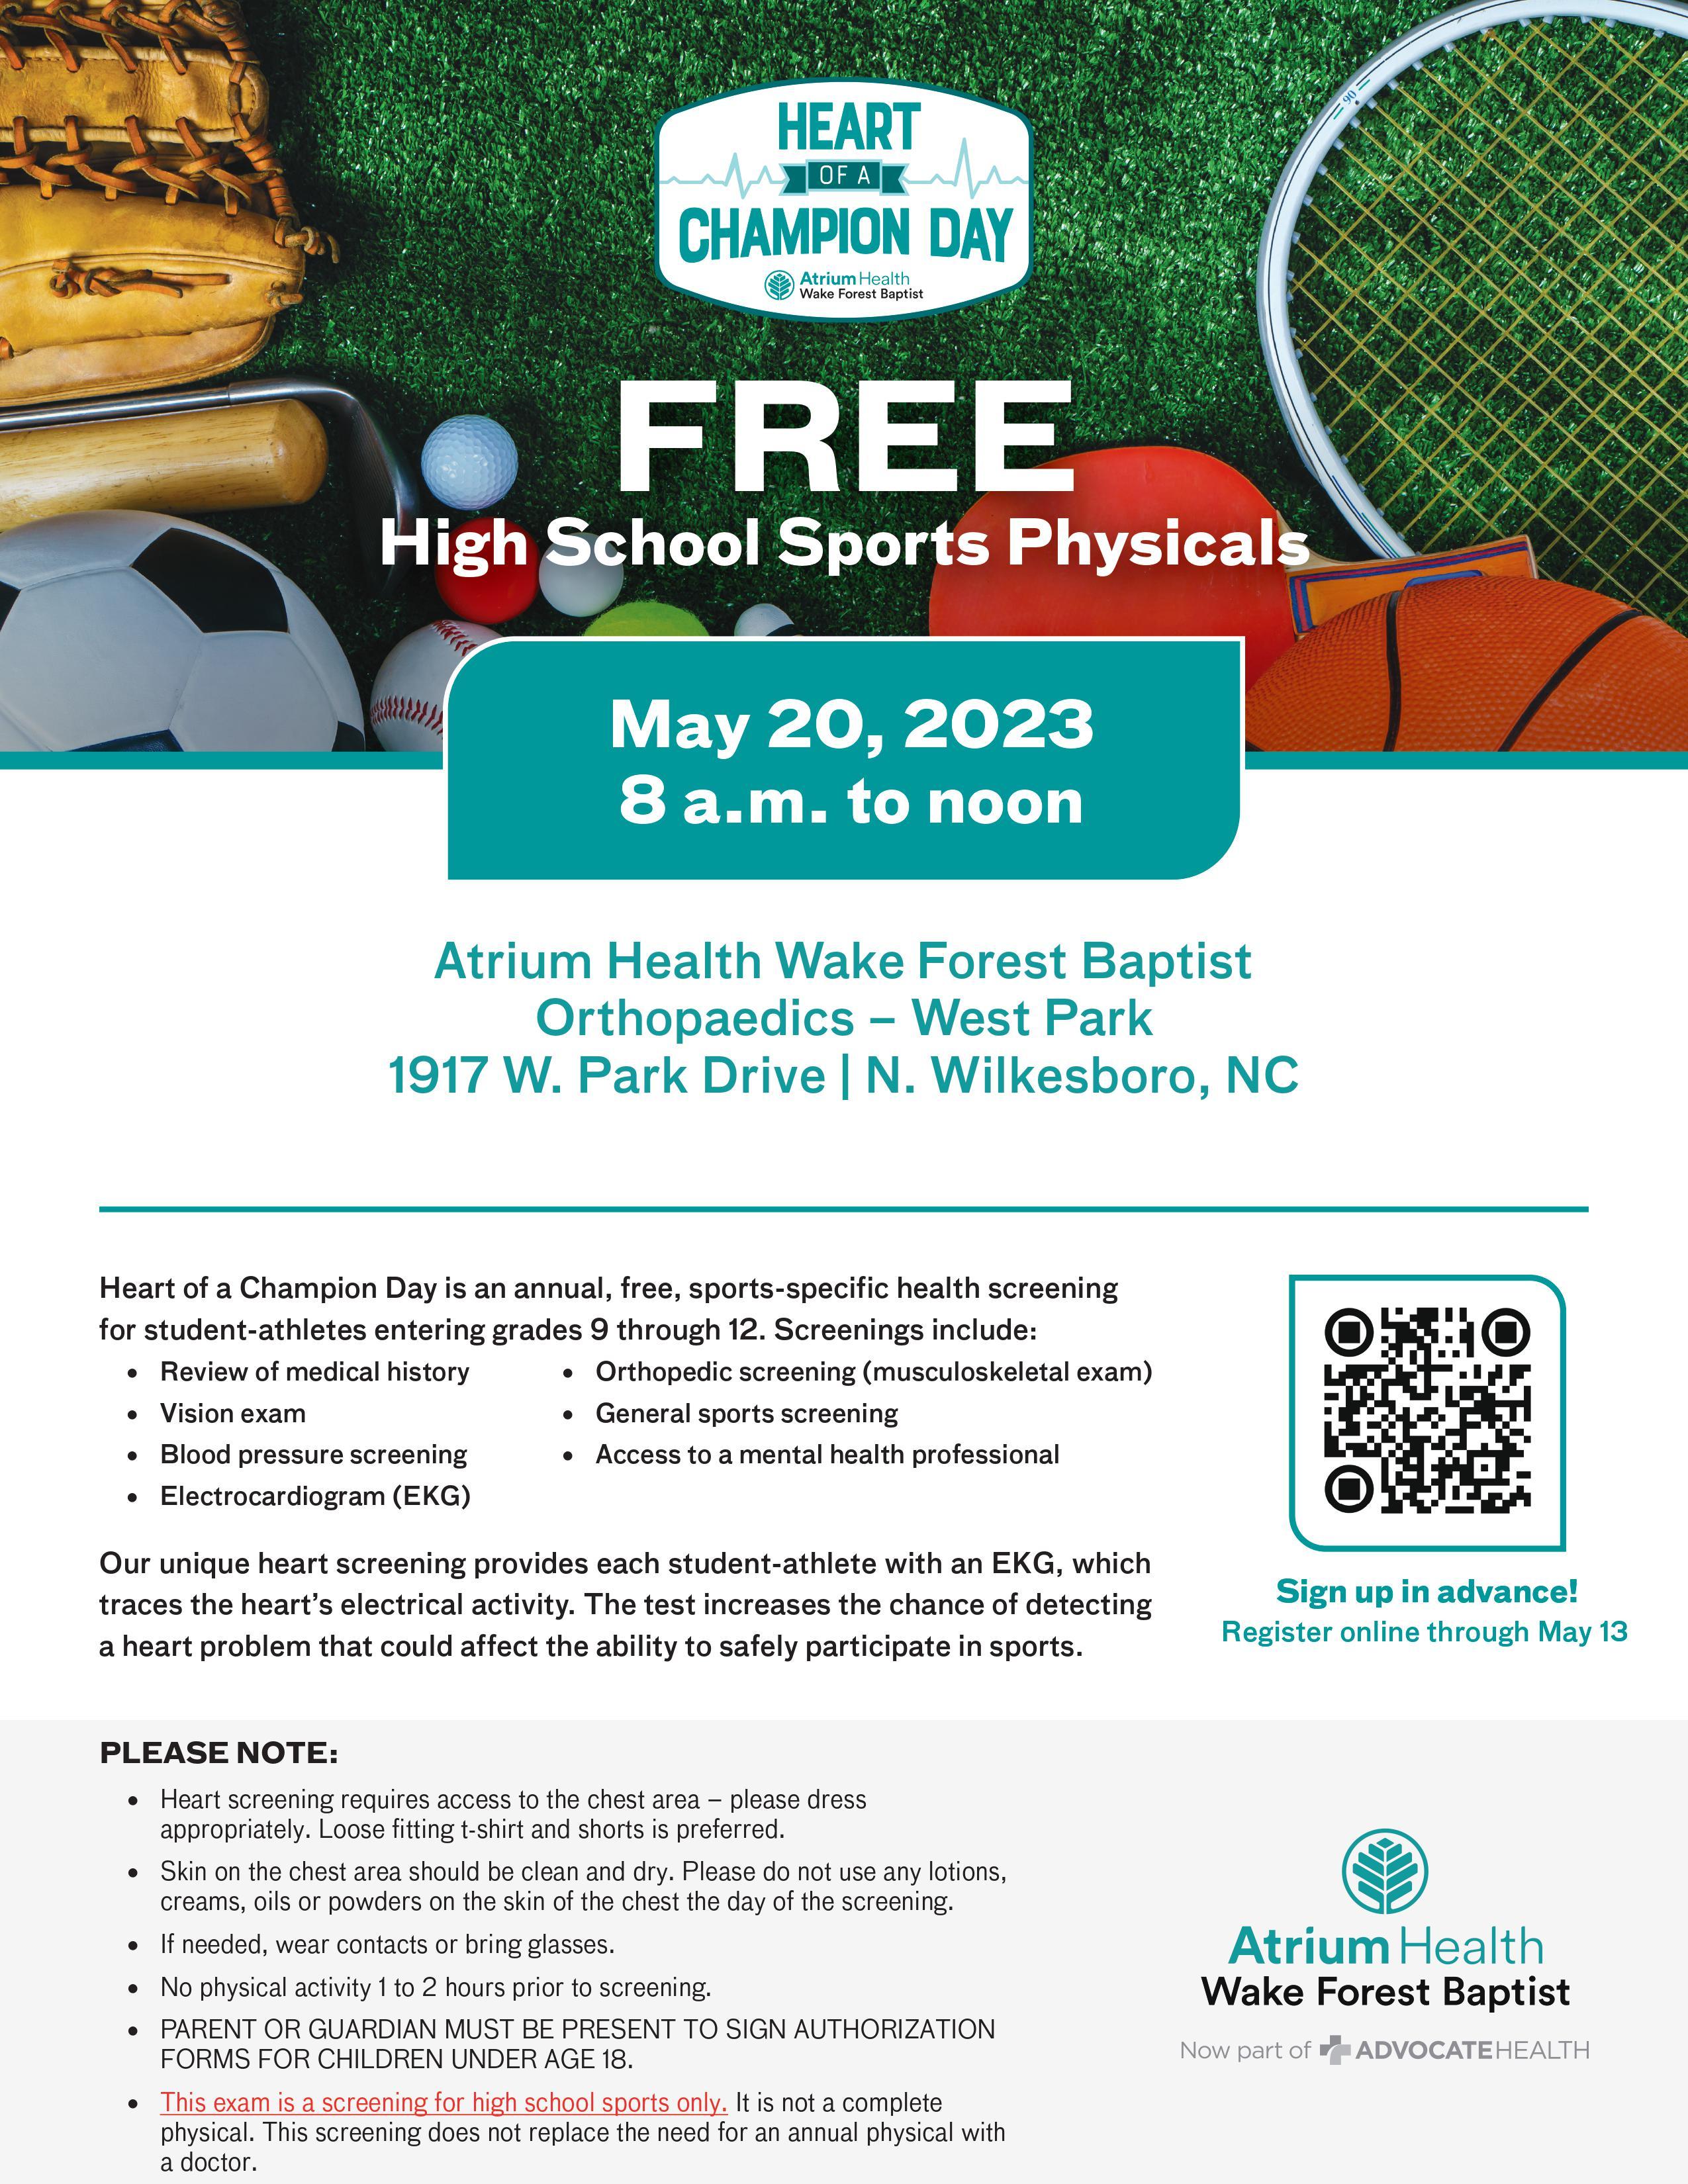 Poster for free physicals